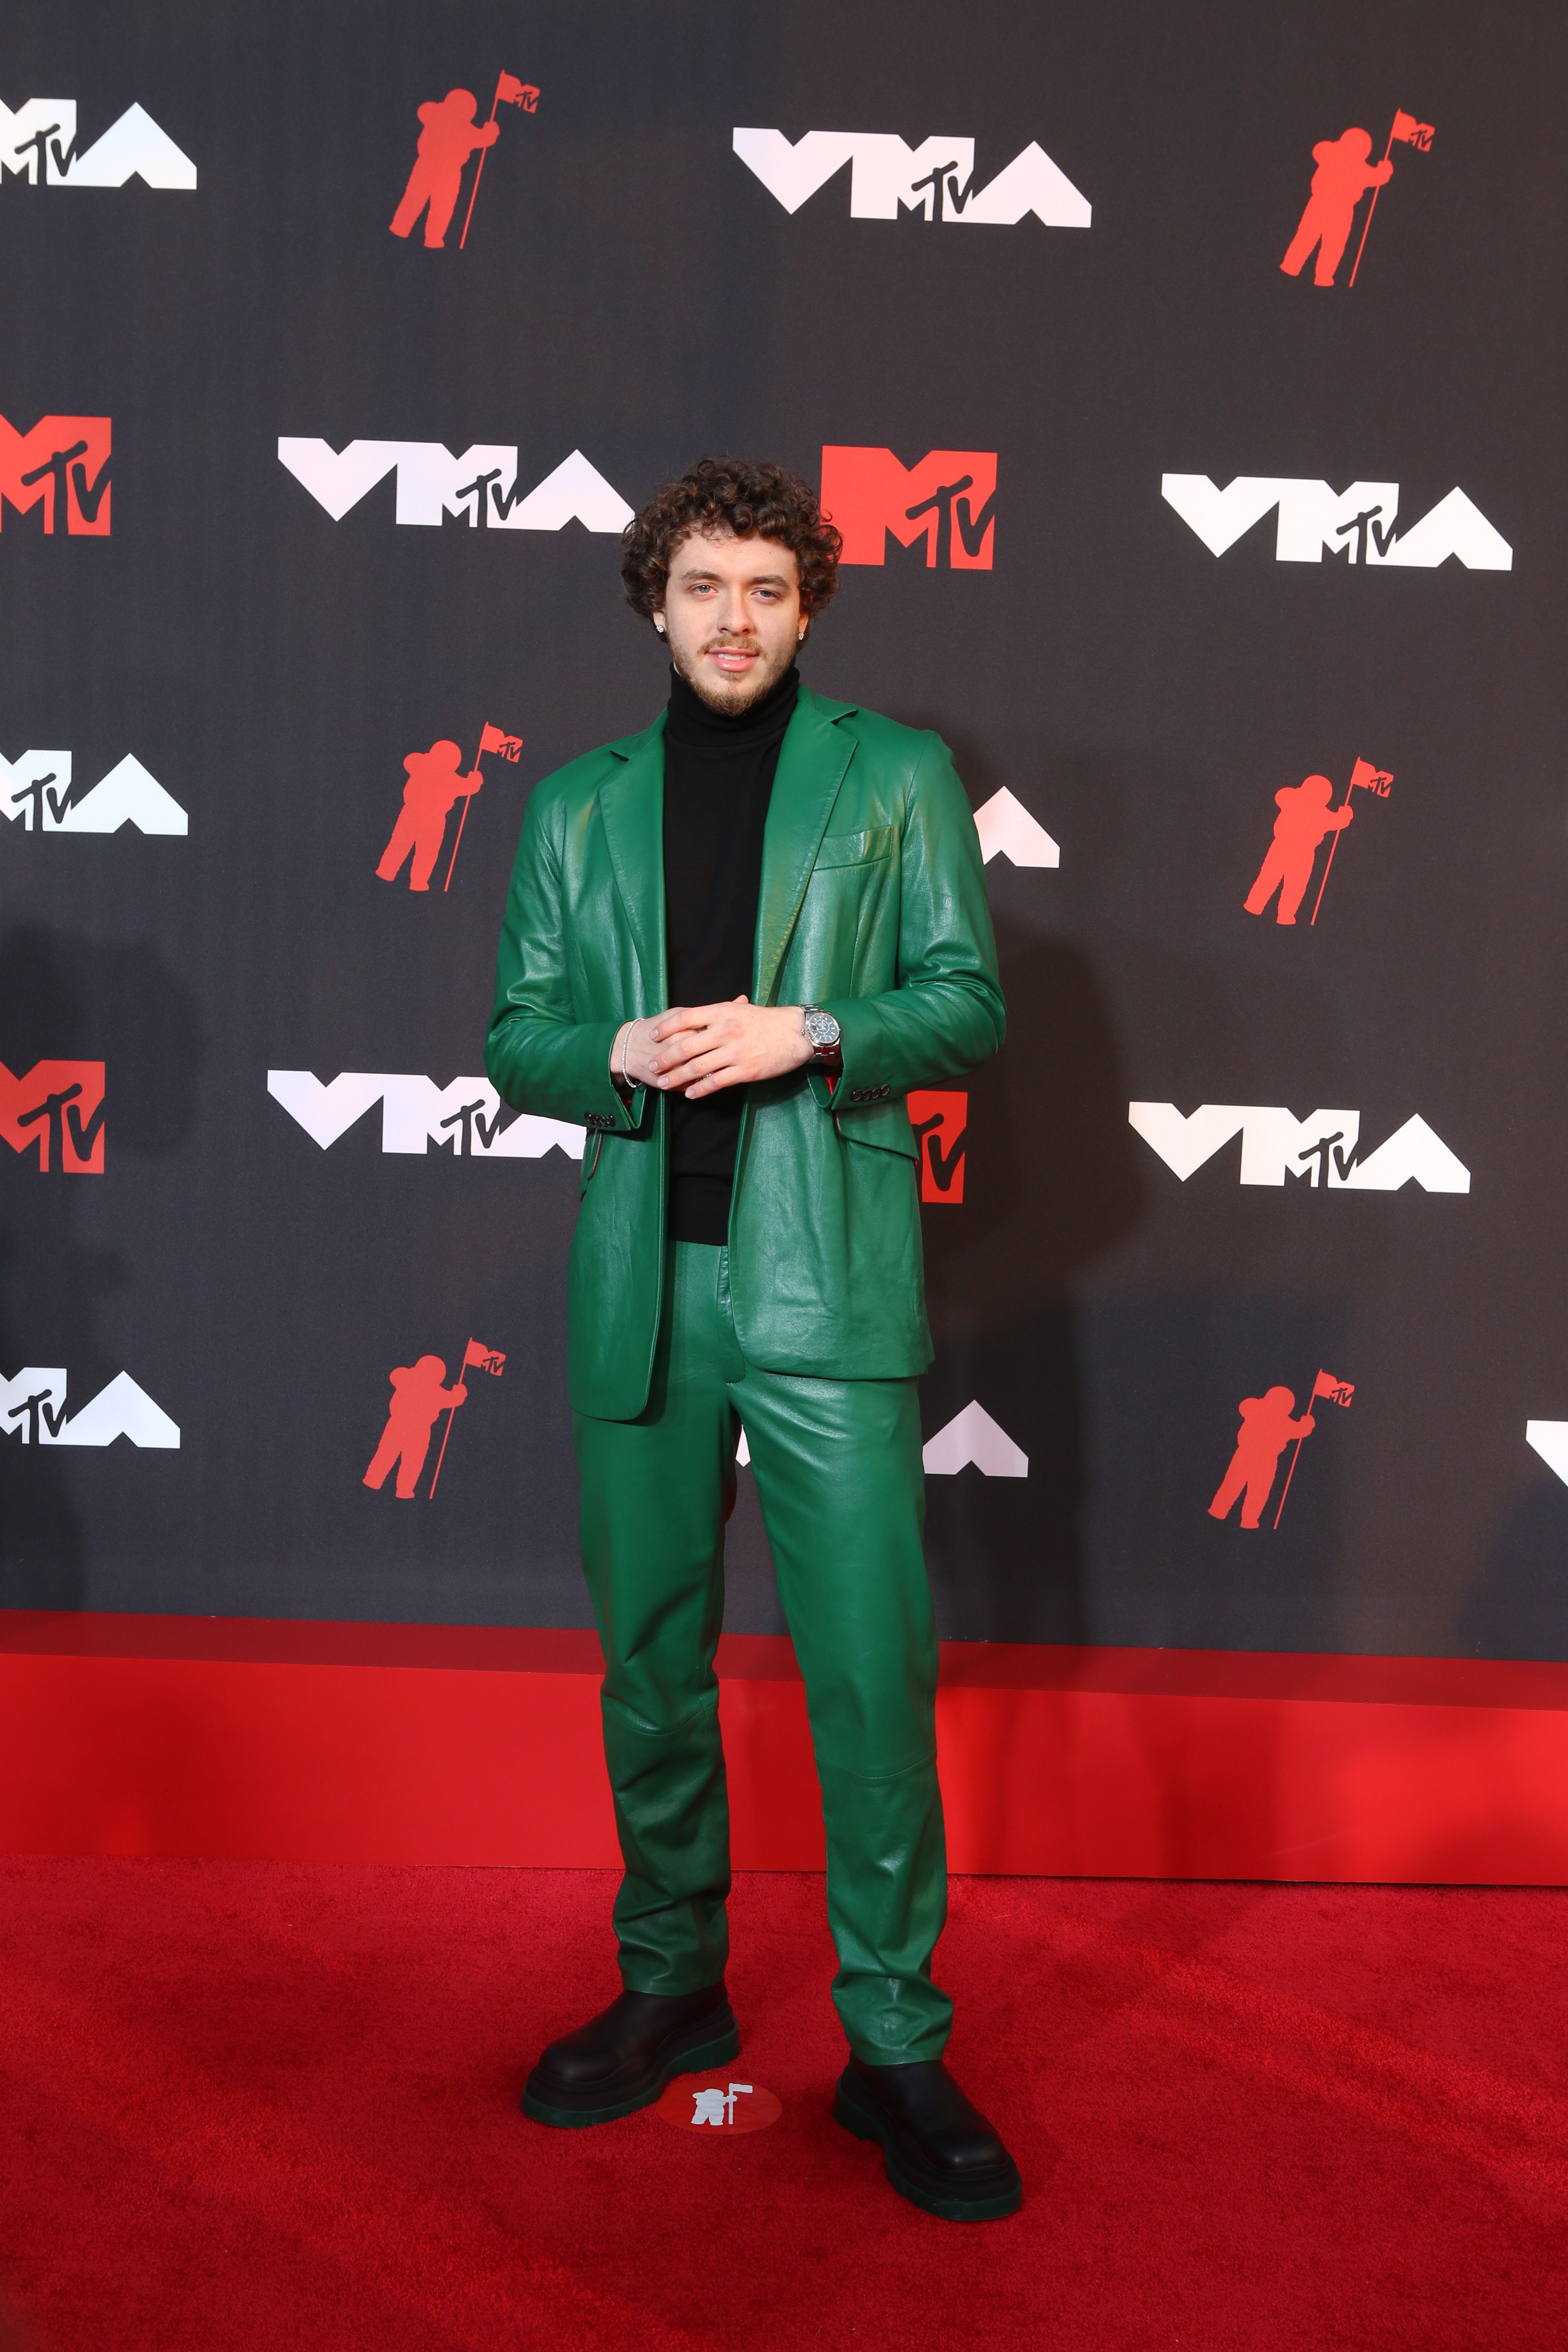 Jack Harlow during the 2021 MTV Video Music Awards at Barclays Center on September 12, 2021 in New York City.  | Source: Getty Images